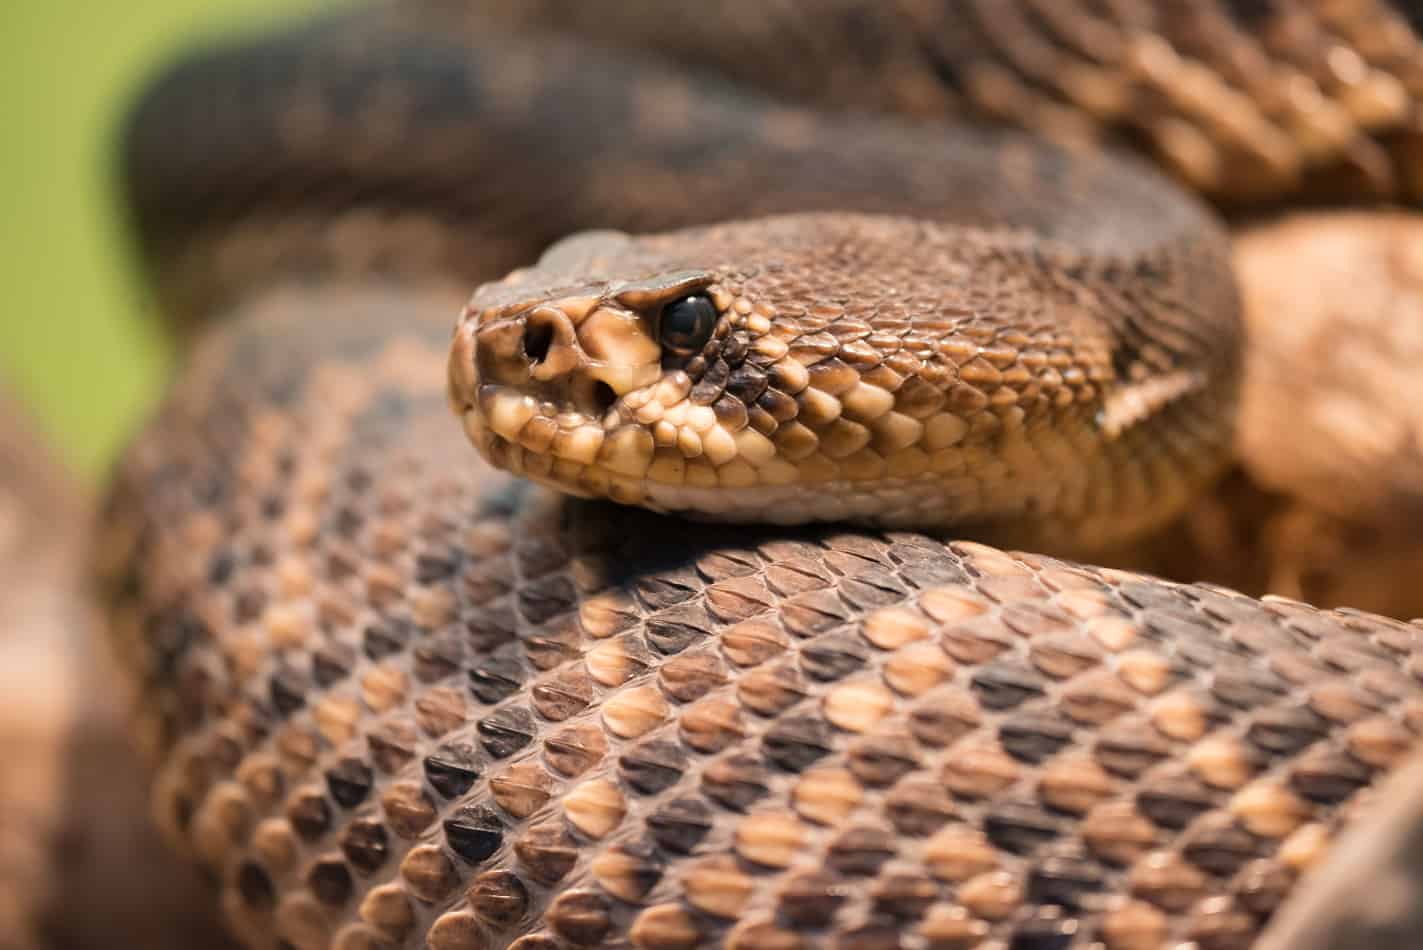 most venomous snake in the US 3 The Most Venomous Snake in the U.S. (With Bite Facts and Pictures)